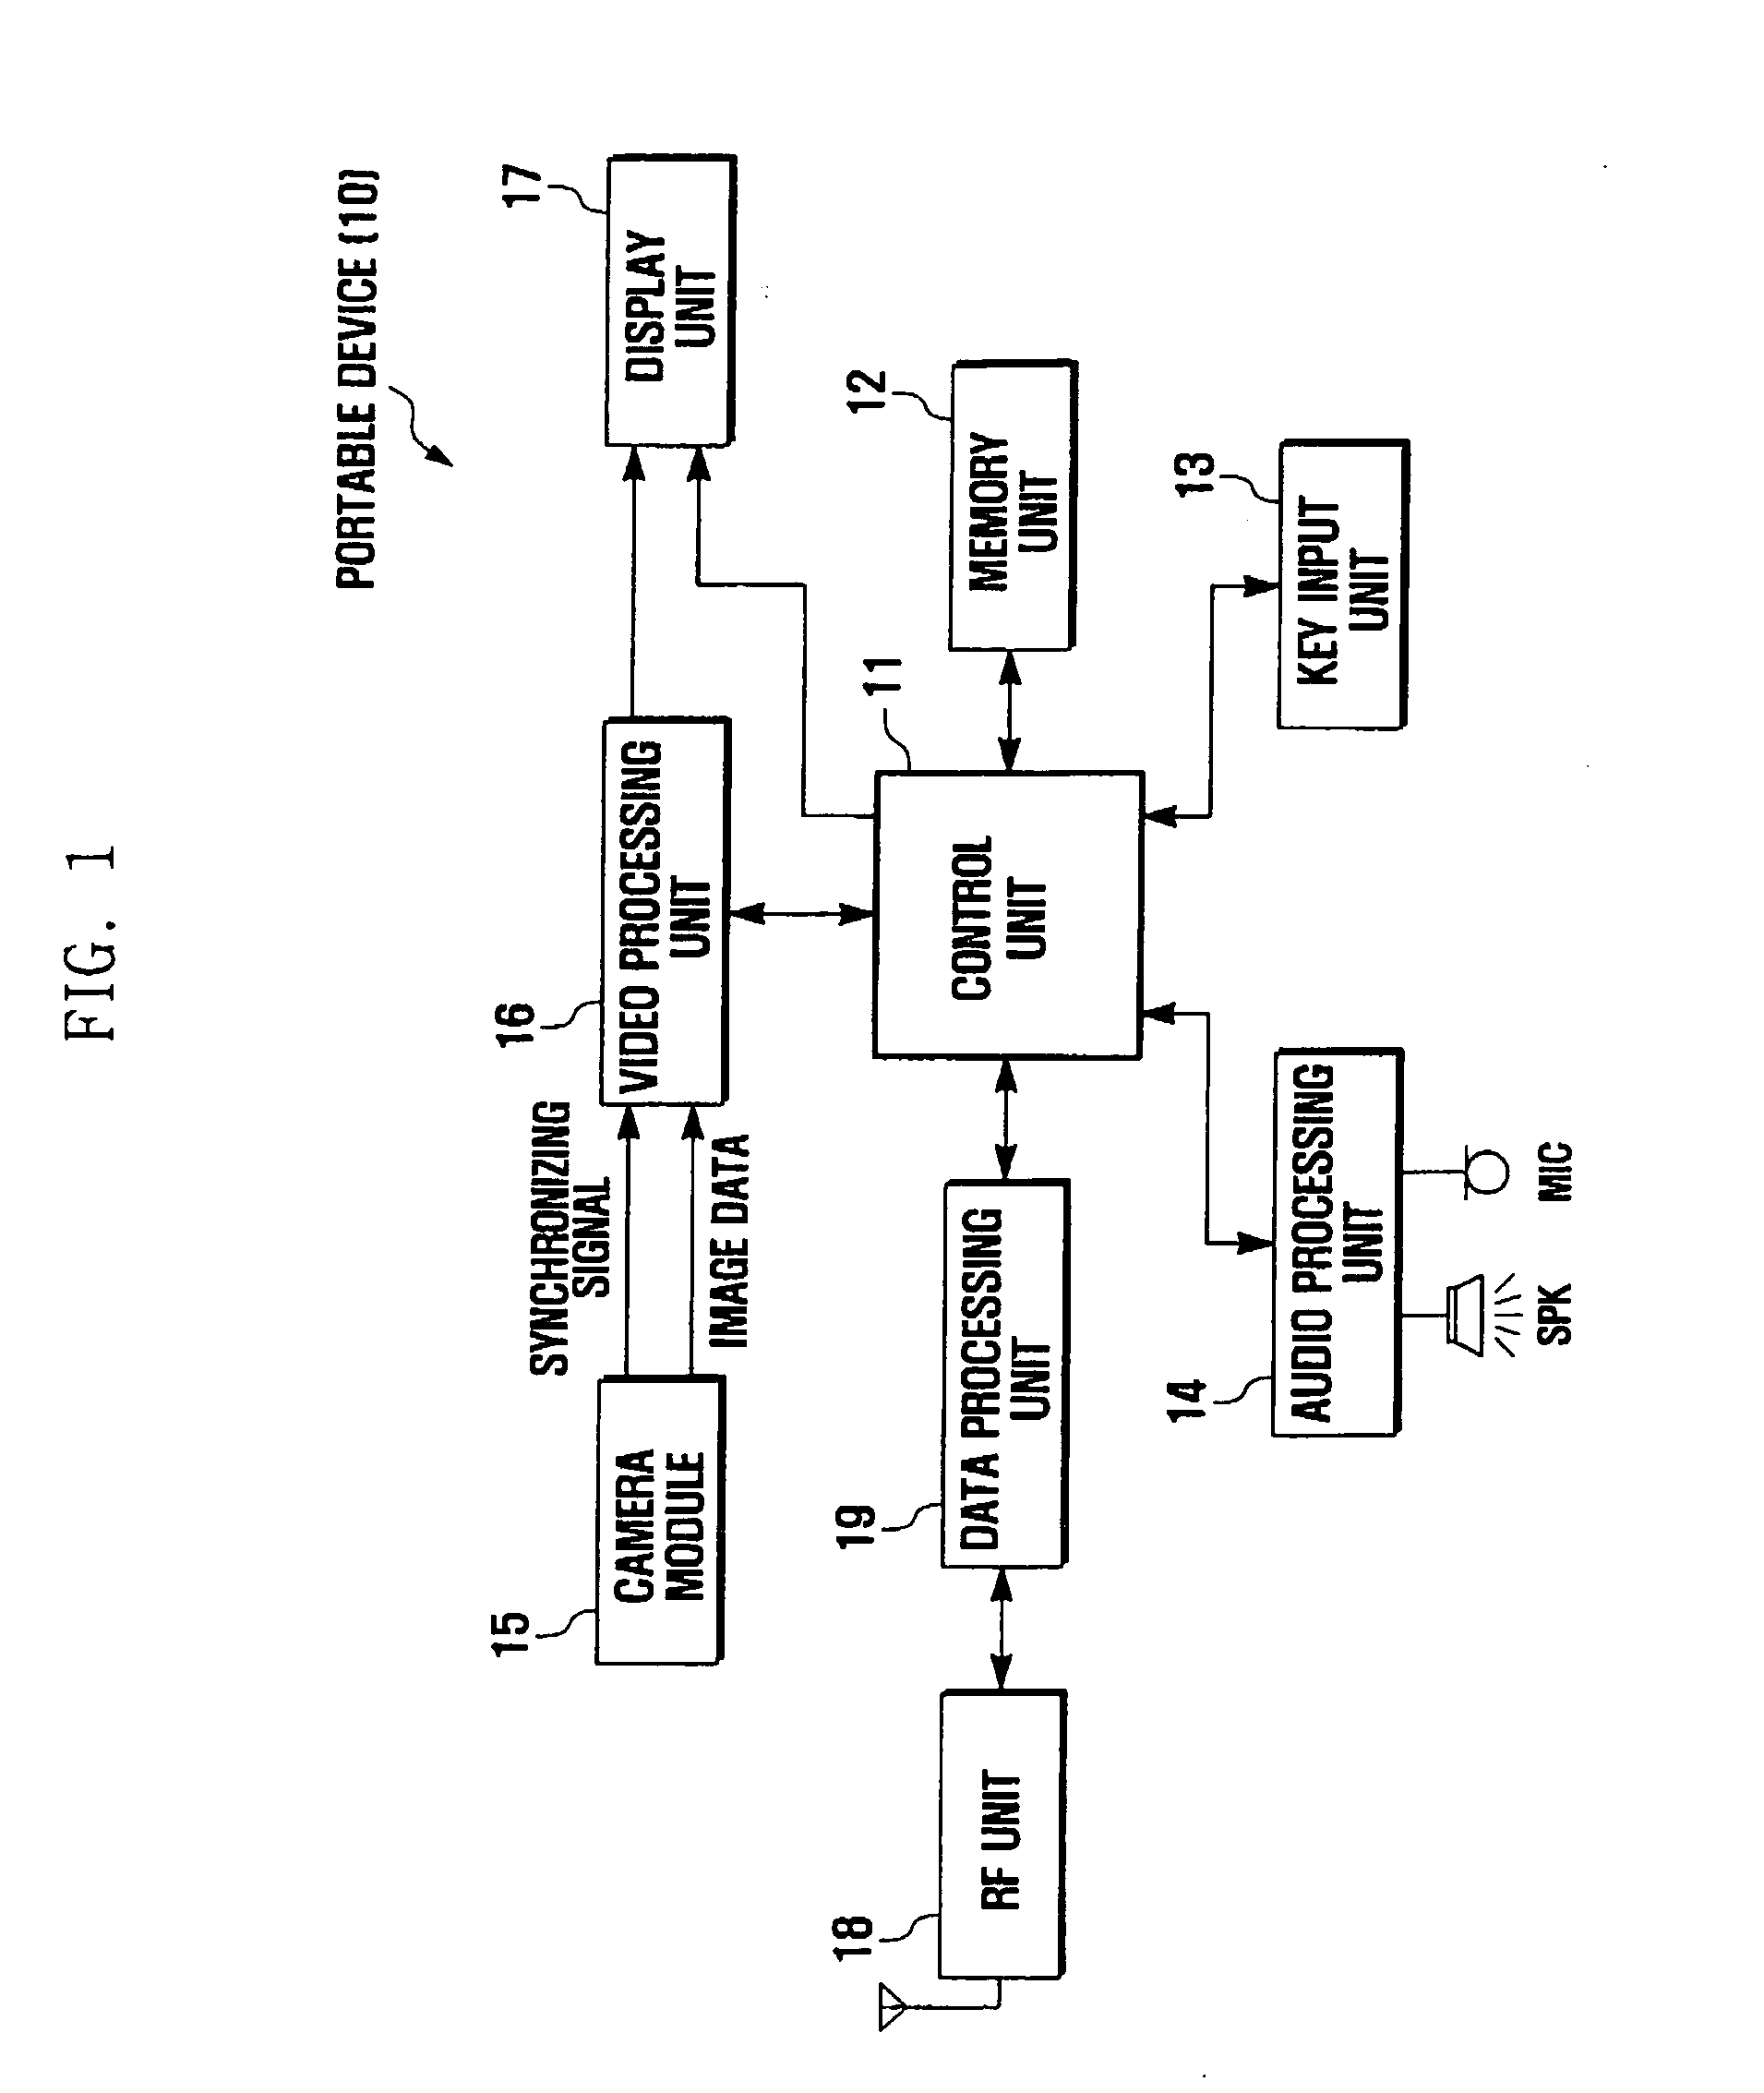 Multimedia content production method for portable device